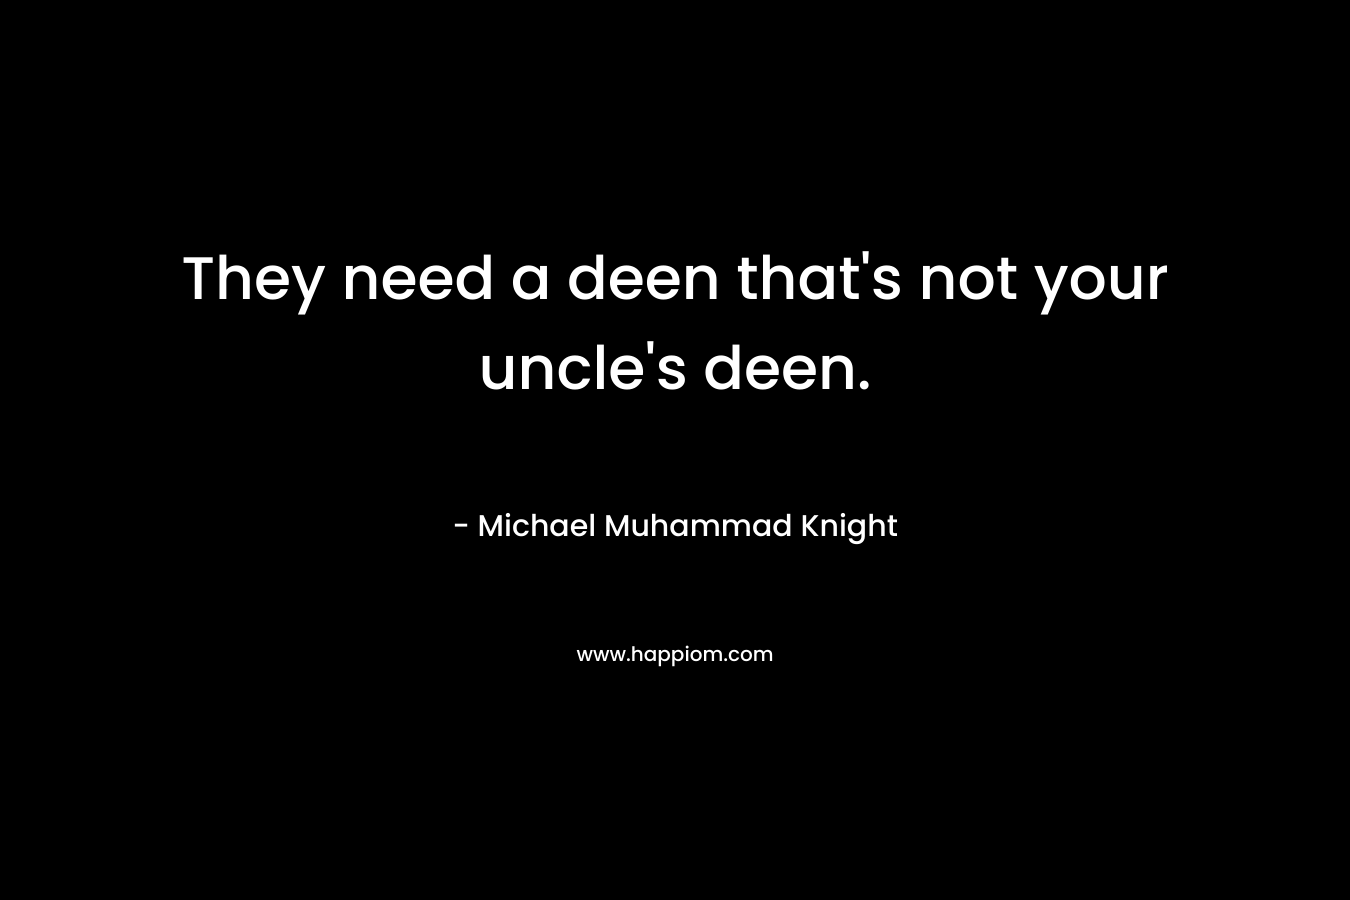 They need a deen that's not your uncle's deen.